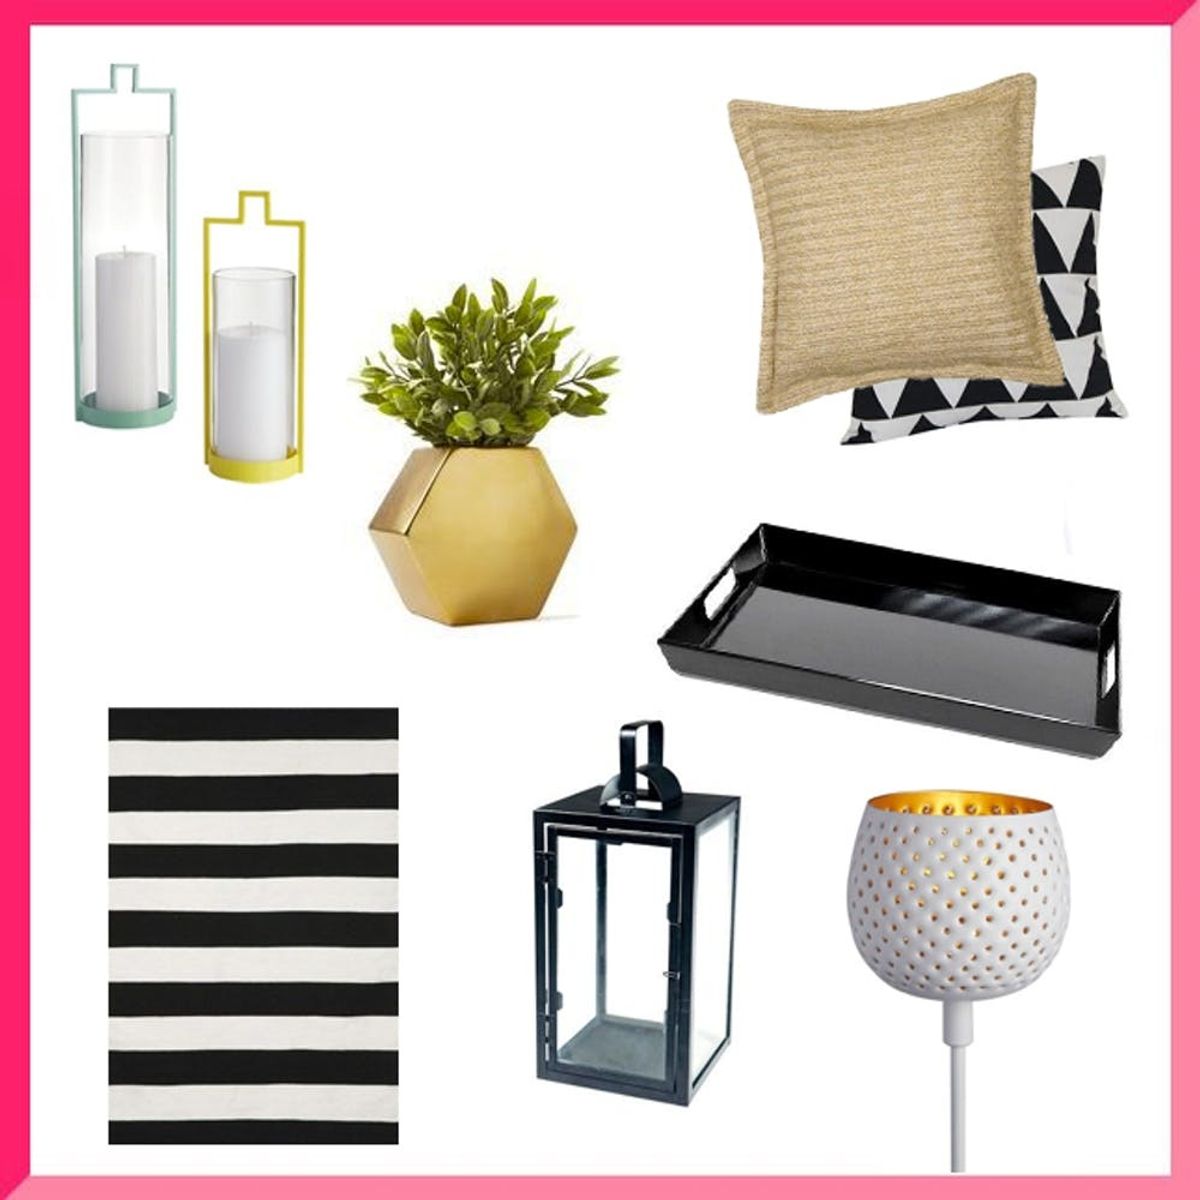 18 Decor Pieces Under $25 to Dress Up Your Outdoor Space